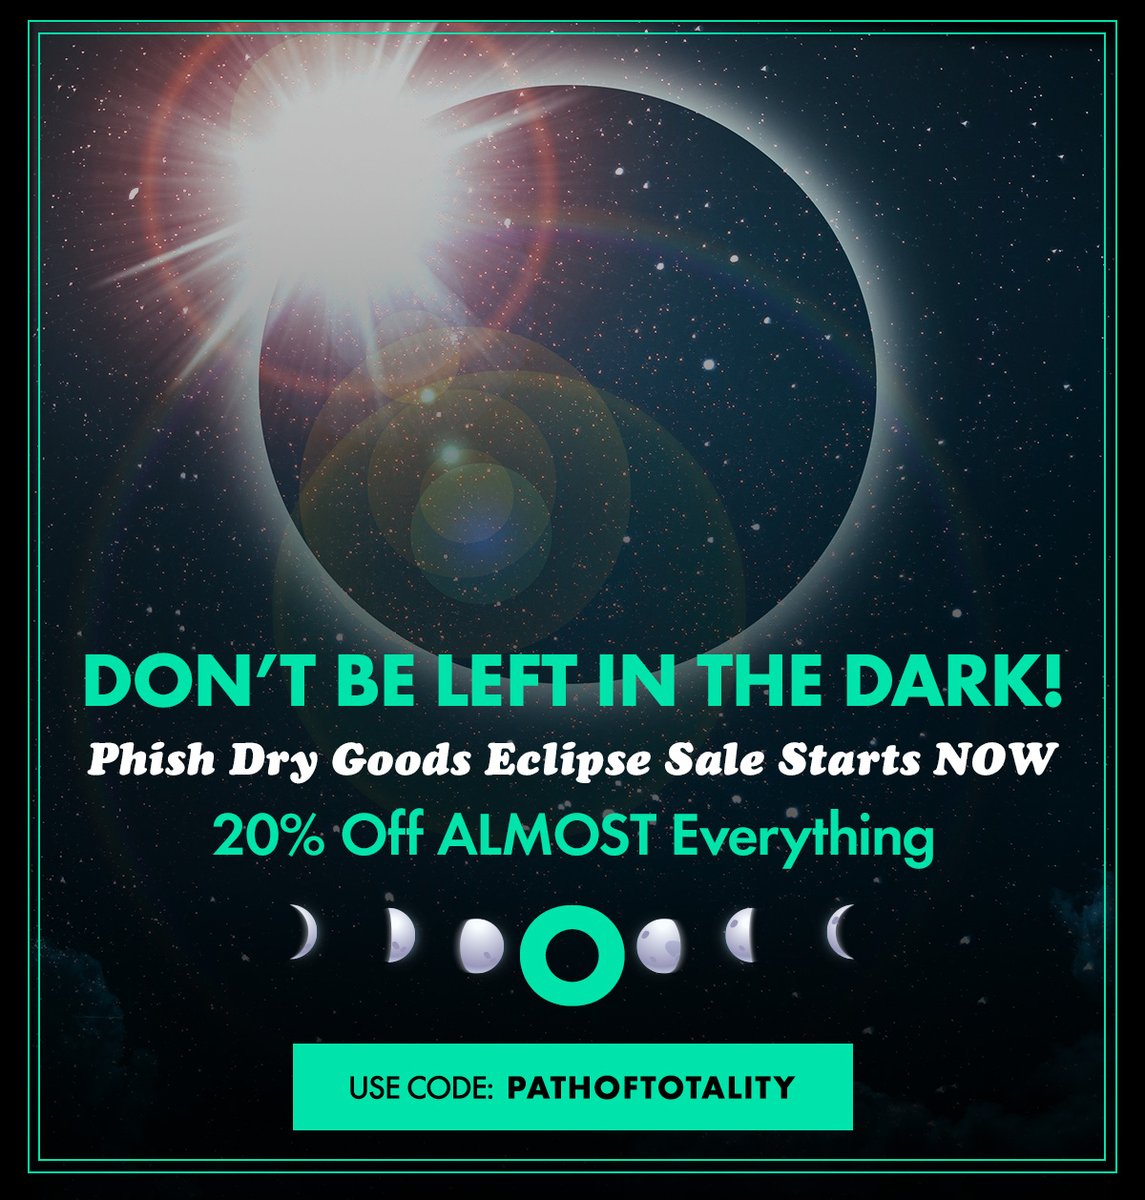 In Burlington, we're in the Path of Totality for the ECLIPSE this afternoon! Don't be left in the dark. We're having an Eclipse sale NOW at Dry Goods. 20% off almost everything in the store when you use code: PATHOFTOTALITY 🌘🌓🌑🌔